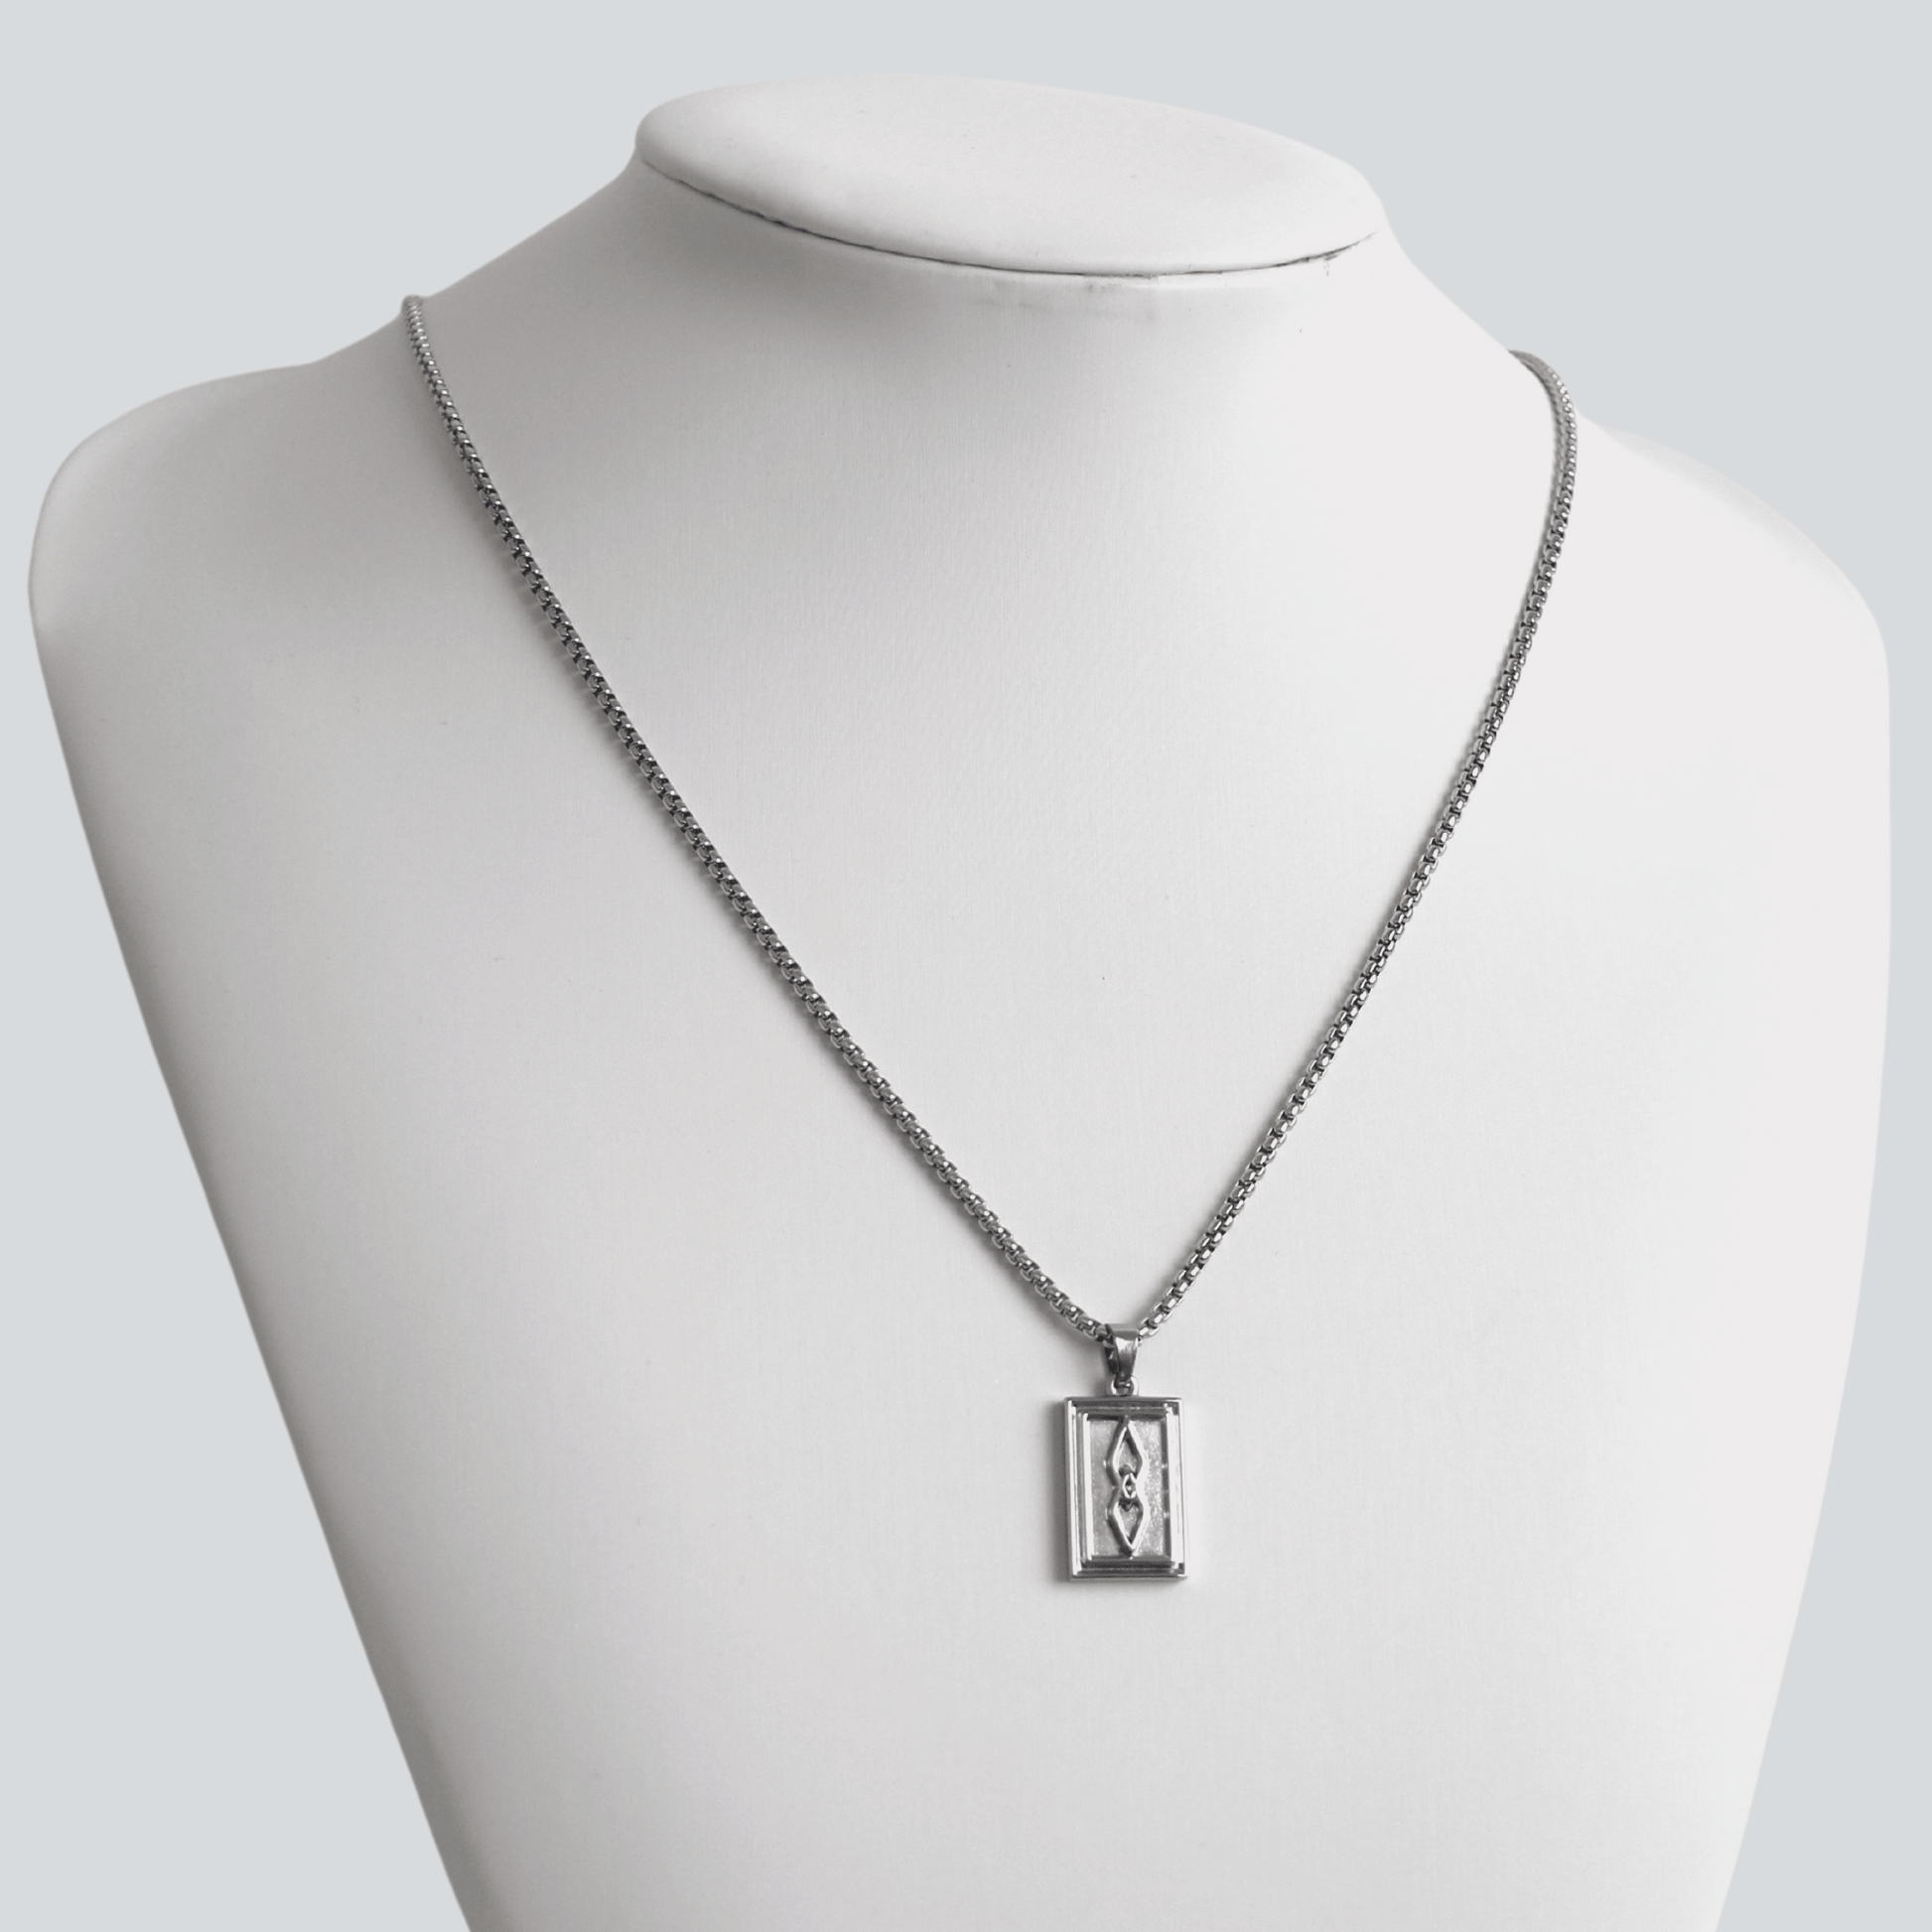 Silver Rectangle Pendant Necklace 2mm Box Chain For Men - Pendant Necklace - Stainless Steel - Boutique Wear RENN